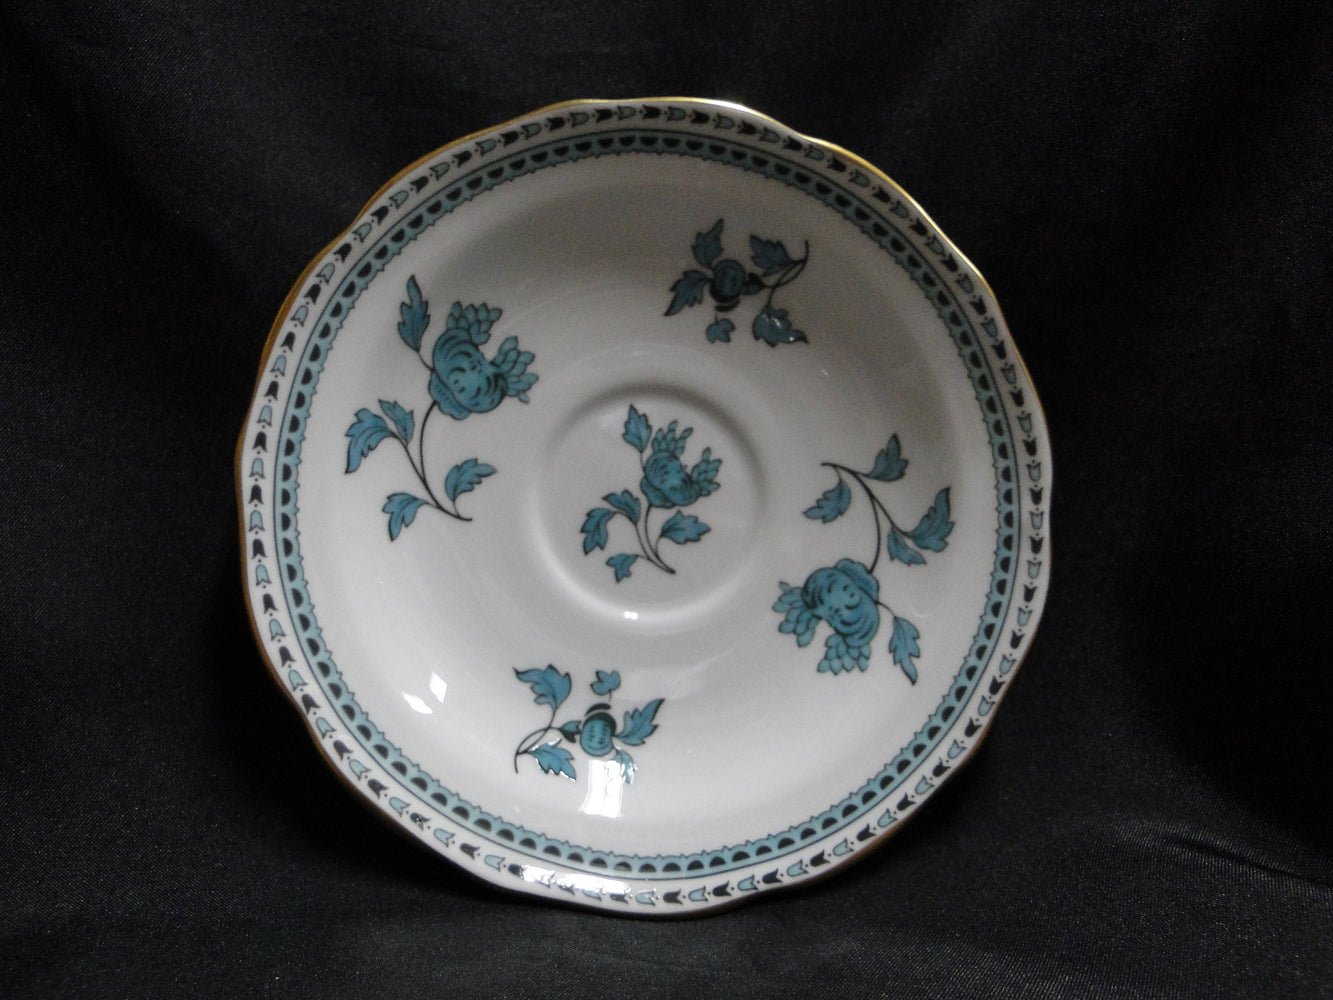 Spode Darlington Teal, Teal Flowers: 5 5/8" Saucer (s) Only, No Cup